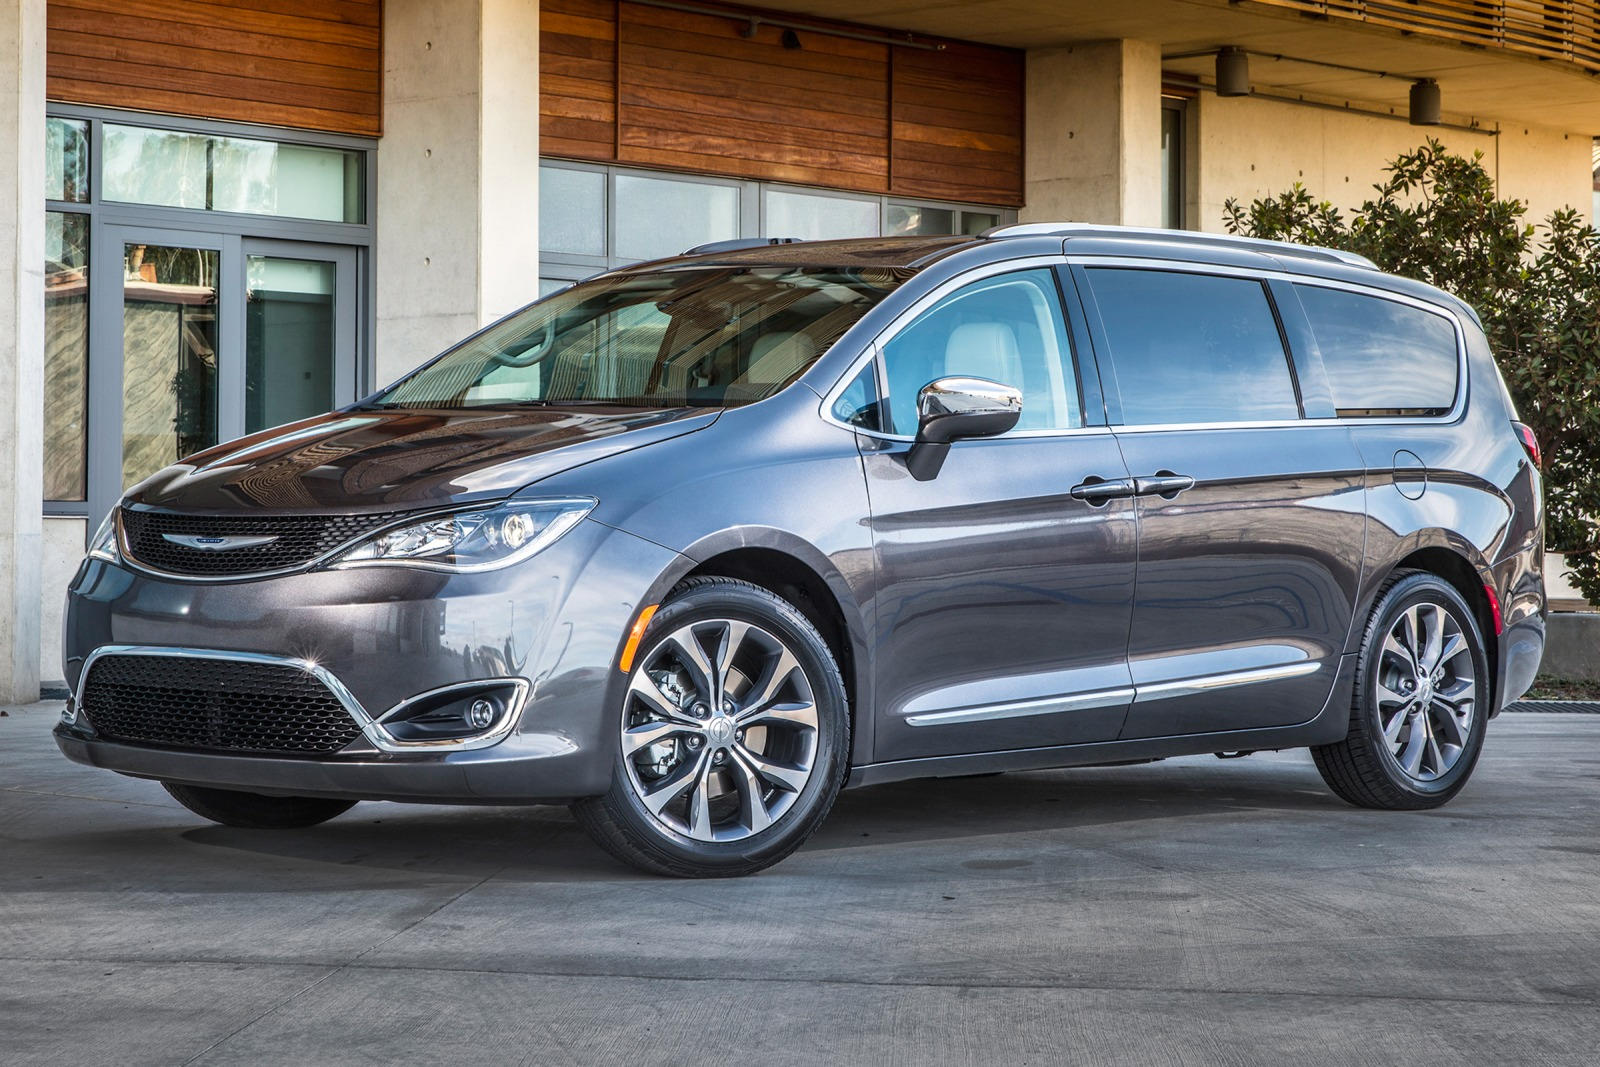 Find Your Perfect Fit: 2017 Chrysler Pacifica Tire Sizes